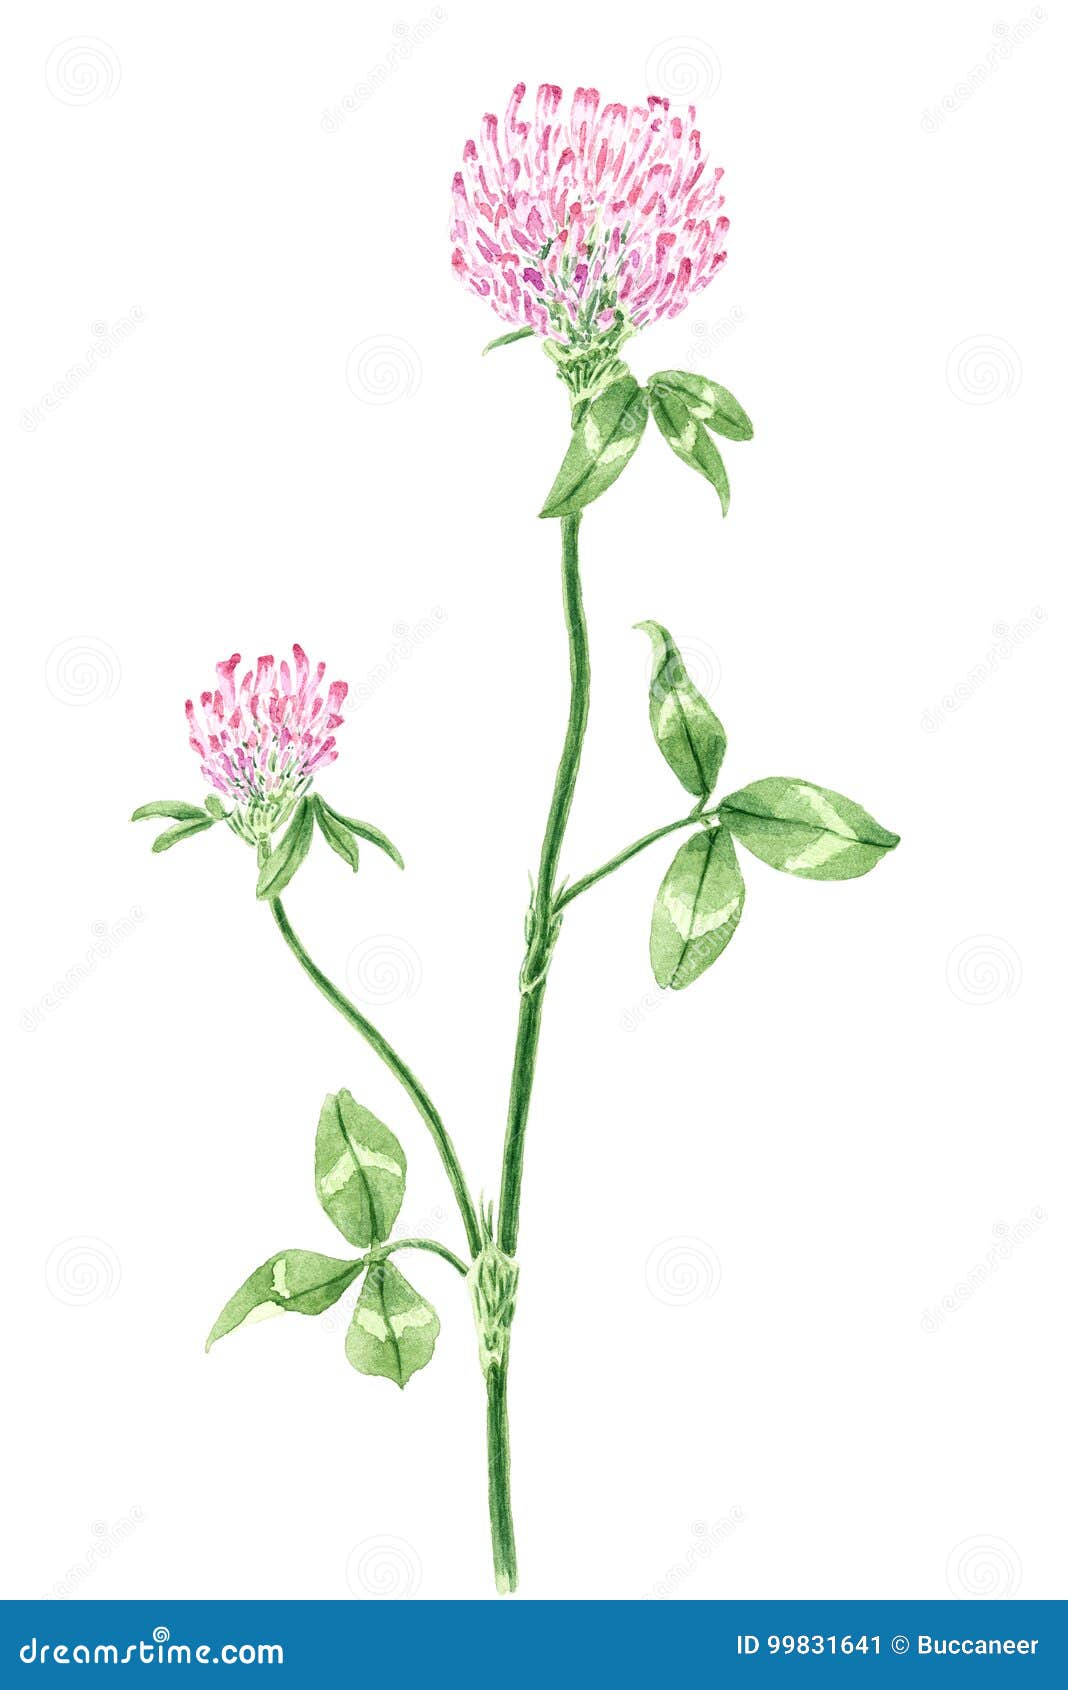 drawing of a red clover trifolium pratense twig